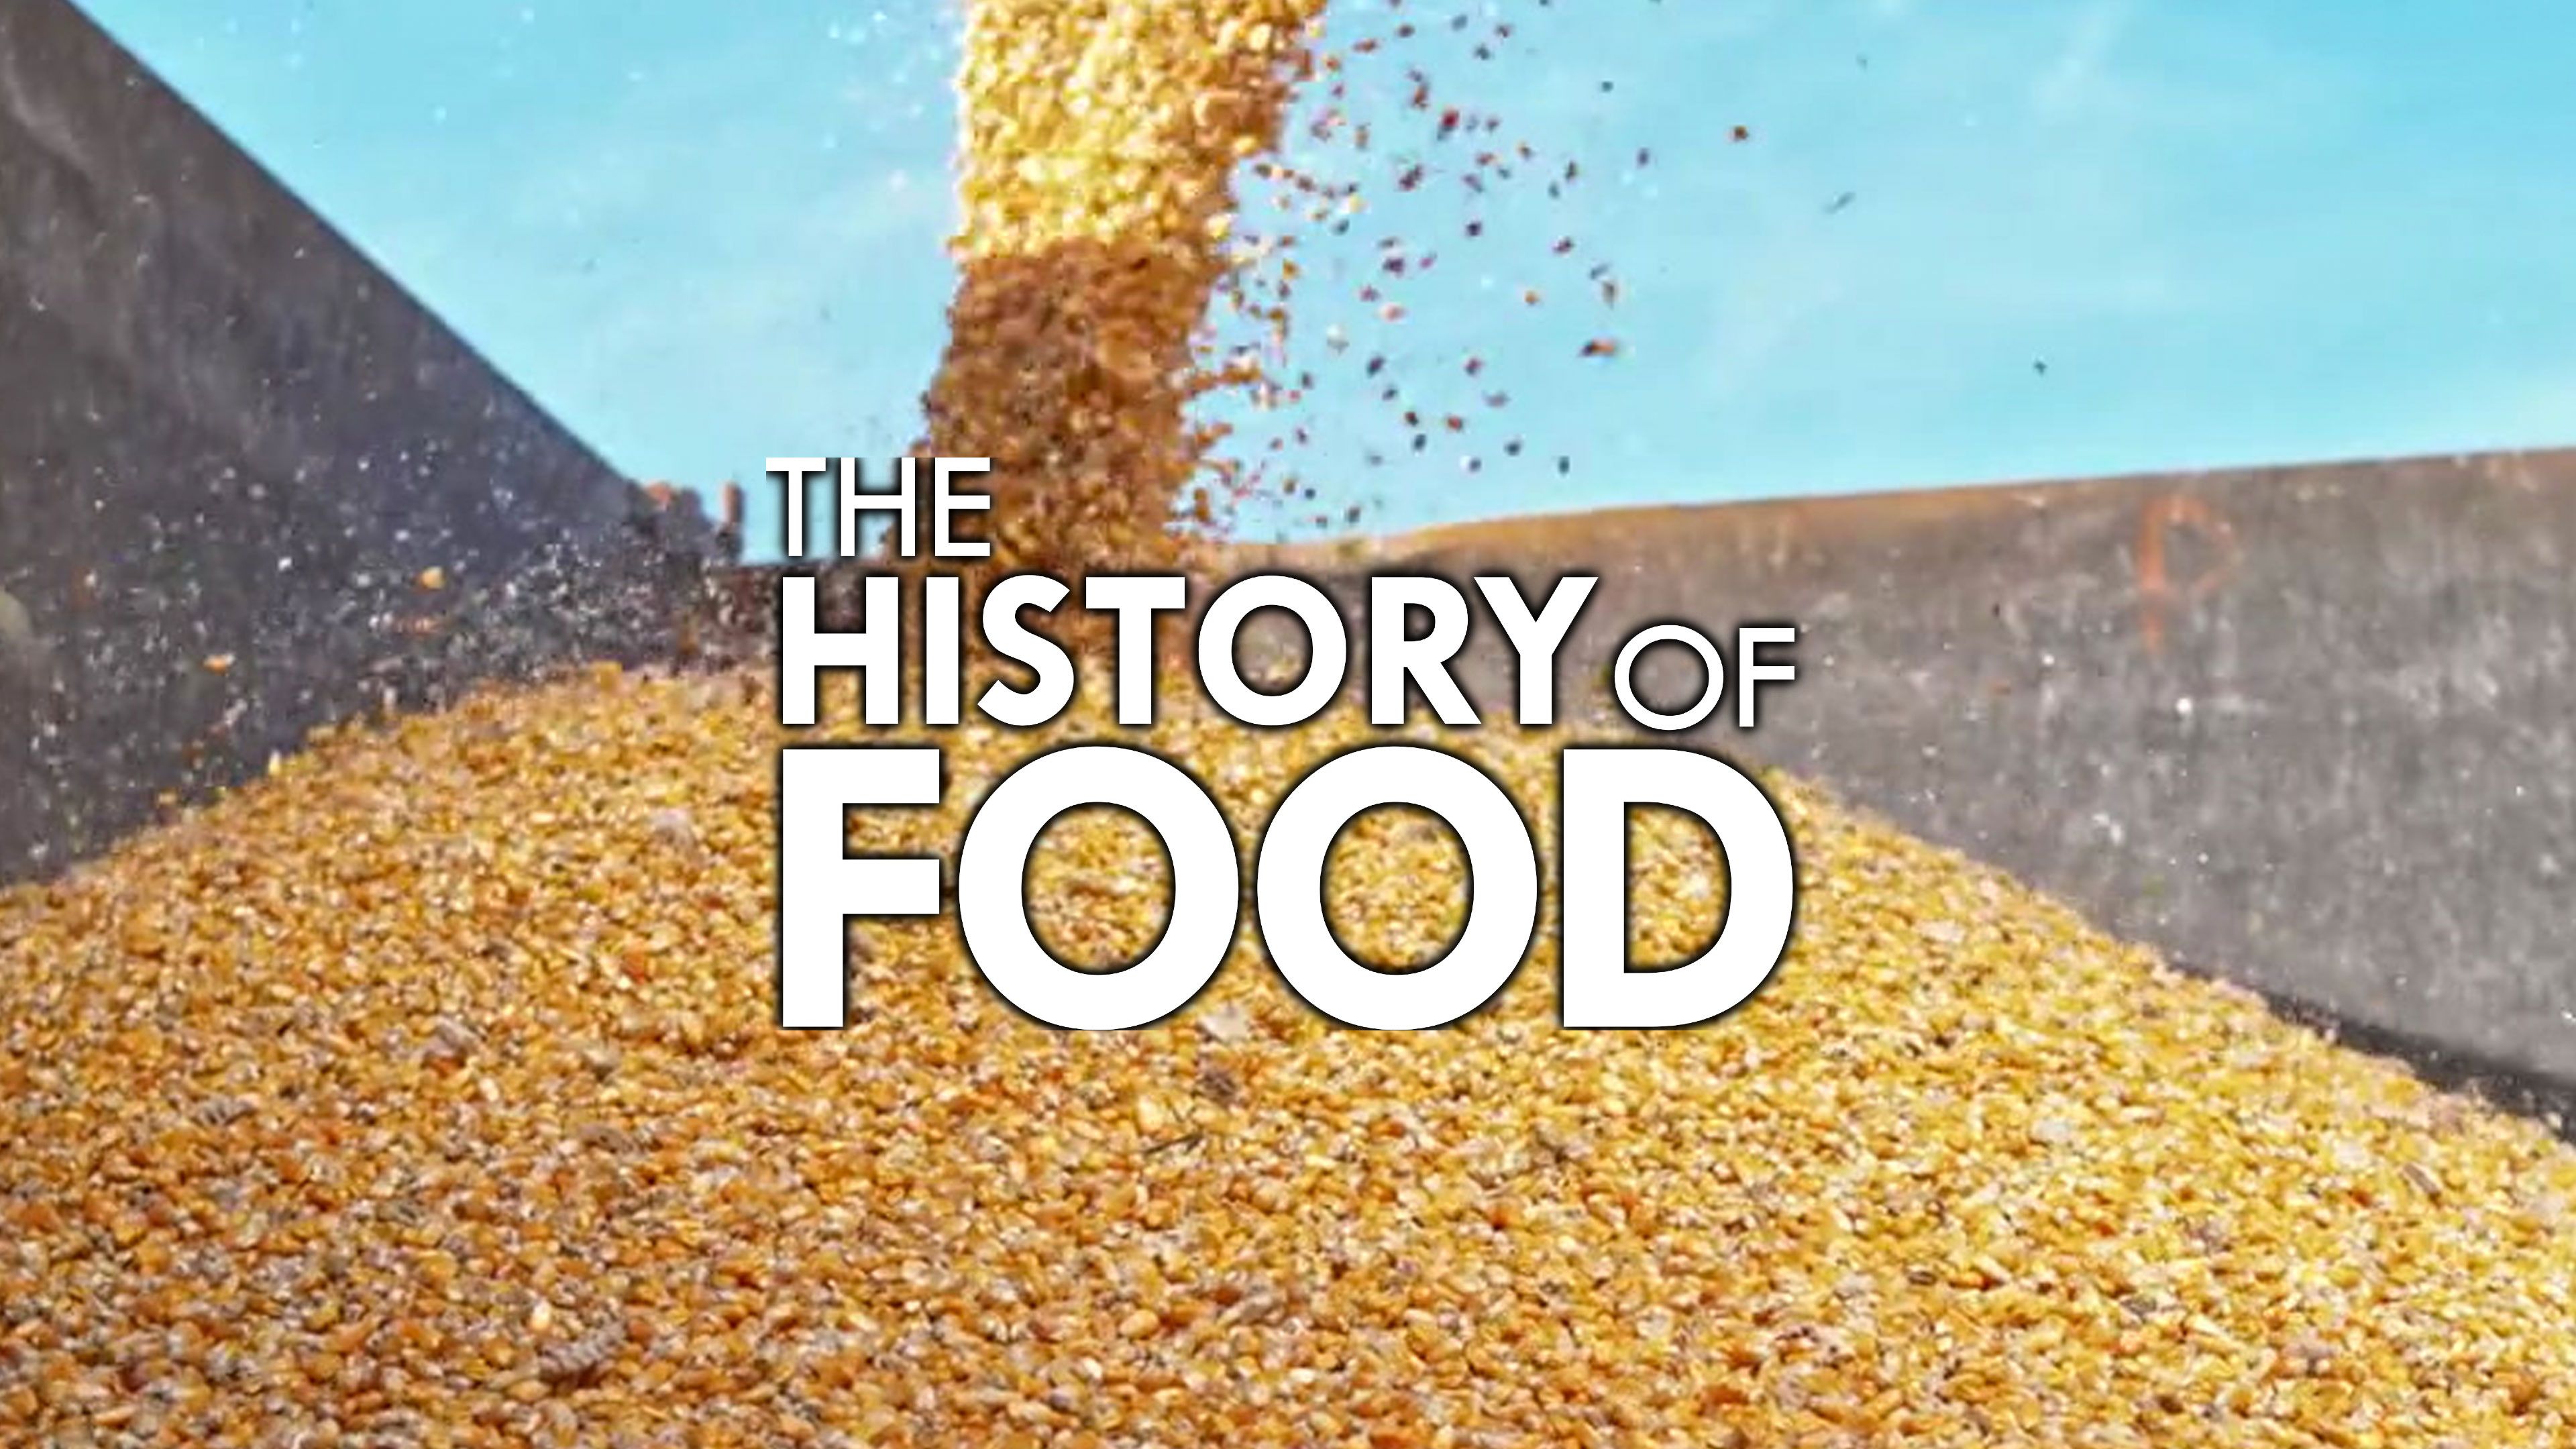 The Industry of Food